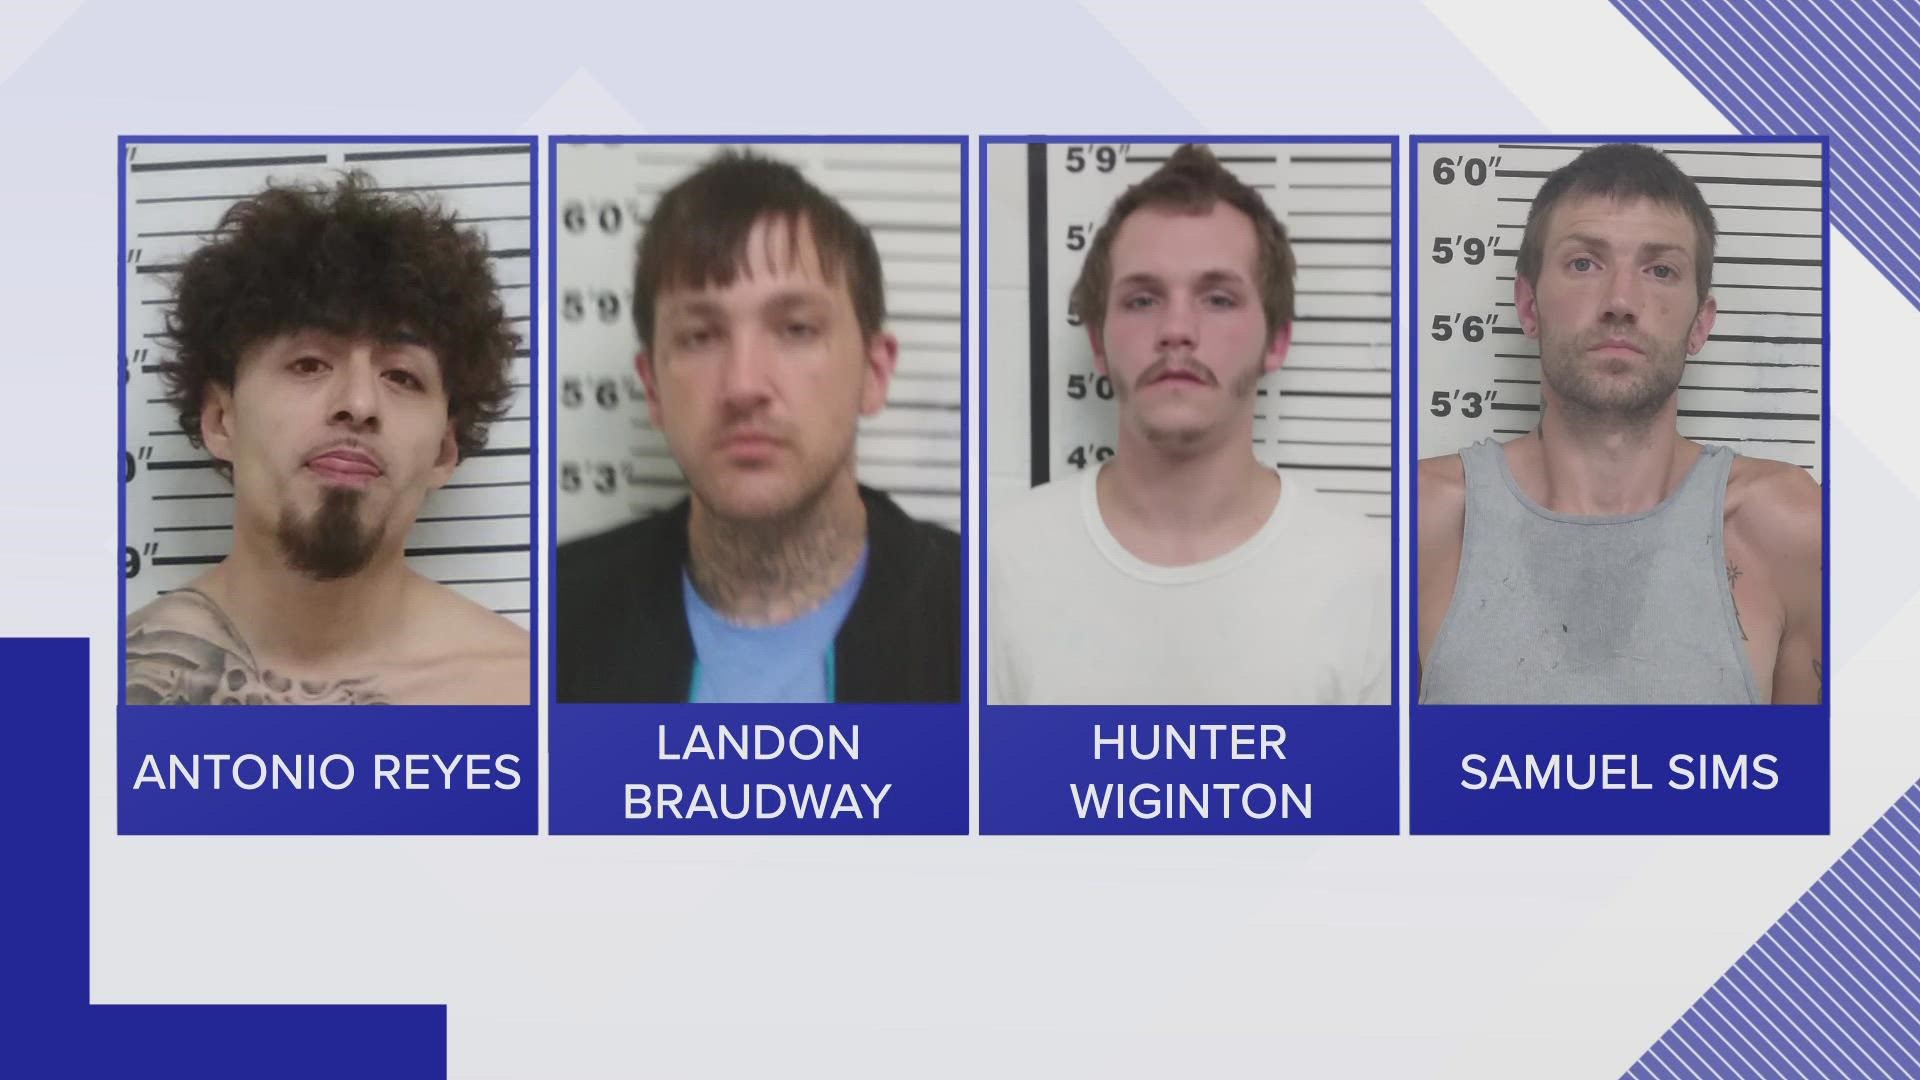 The investigation into how all four inmates escaped in the first place is still ongoing, police said.